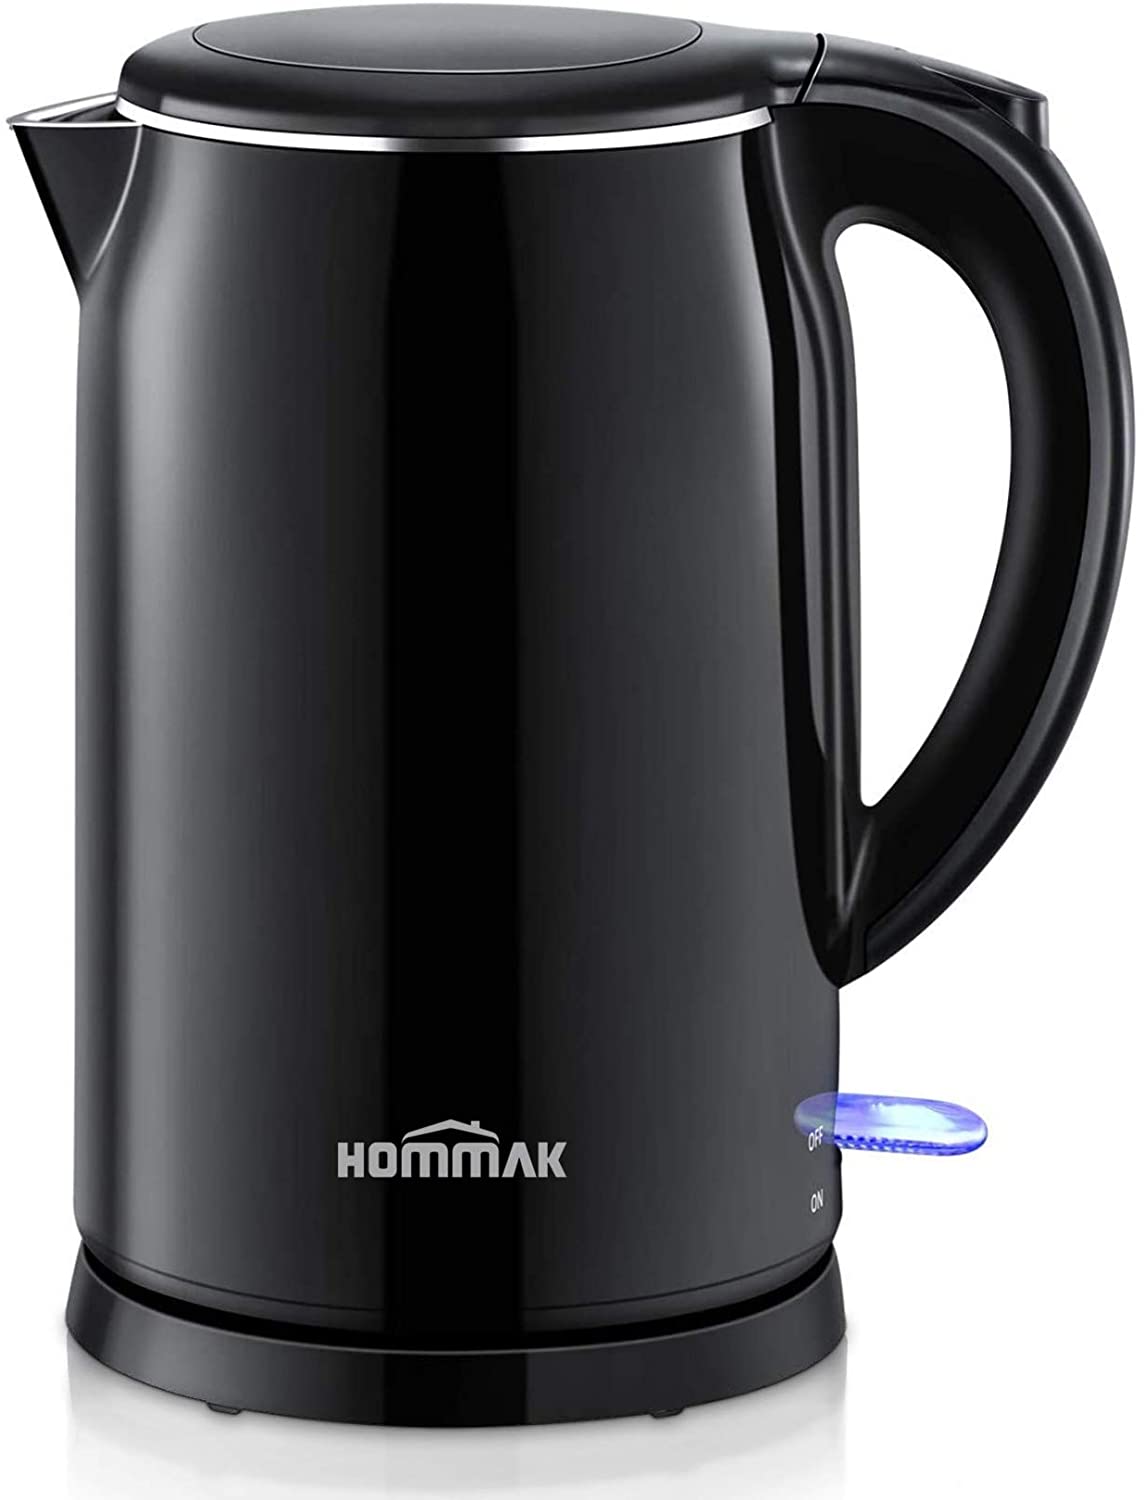 Hommak 1.7L Double Wall 304 Stainless Steel Electric Kettle $19.59 + Free shipping